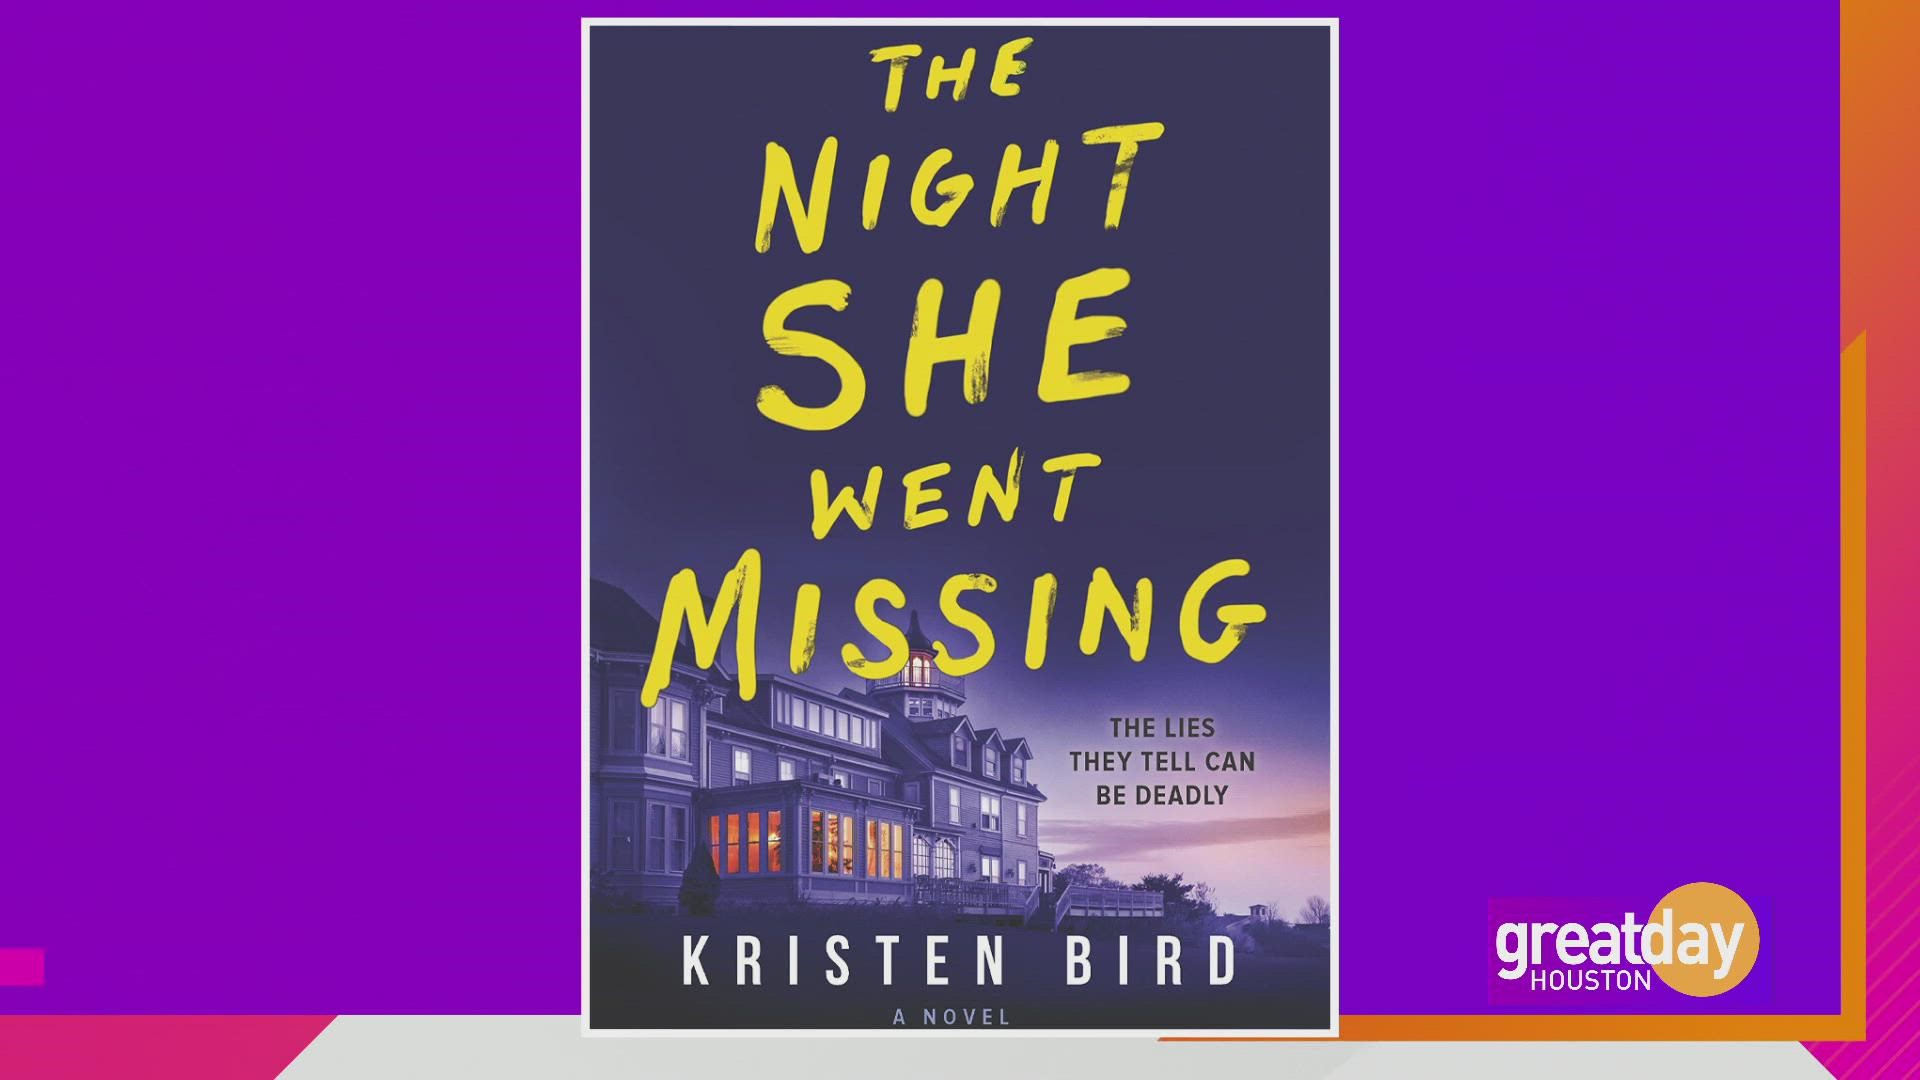 "The Night She Went Missing" by Kristen Bird is perfect for fans of "Big Little Lies"